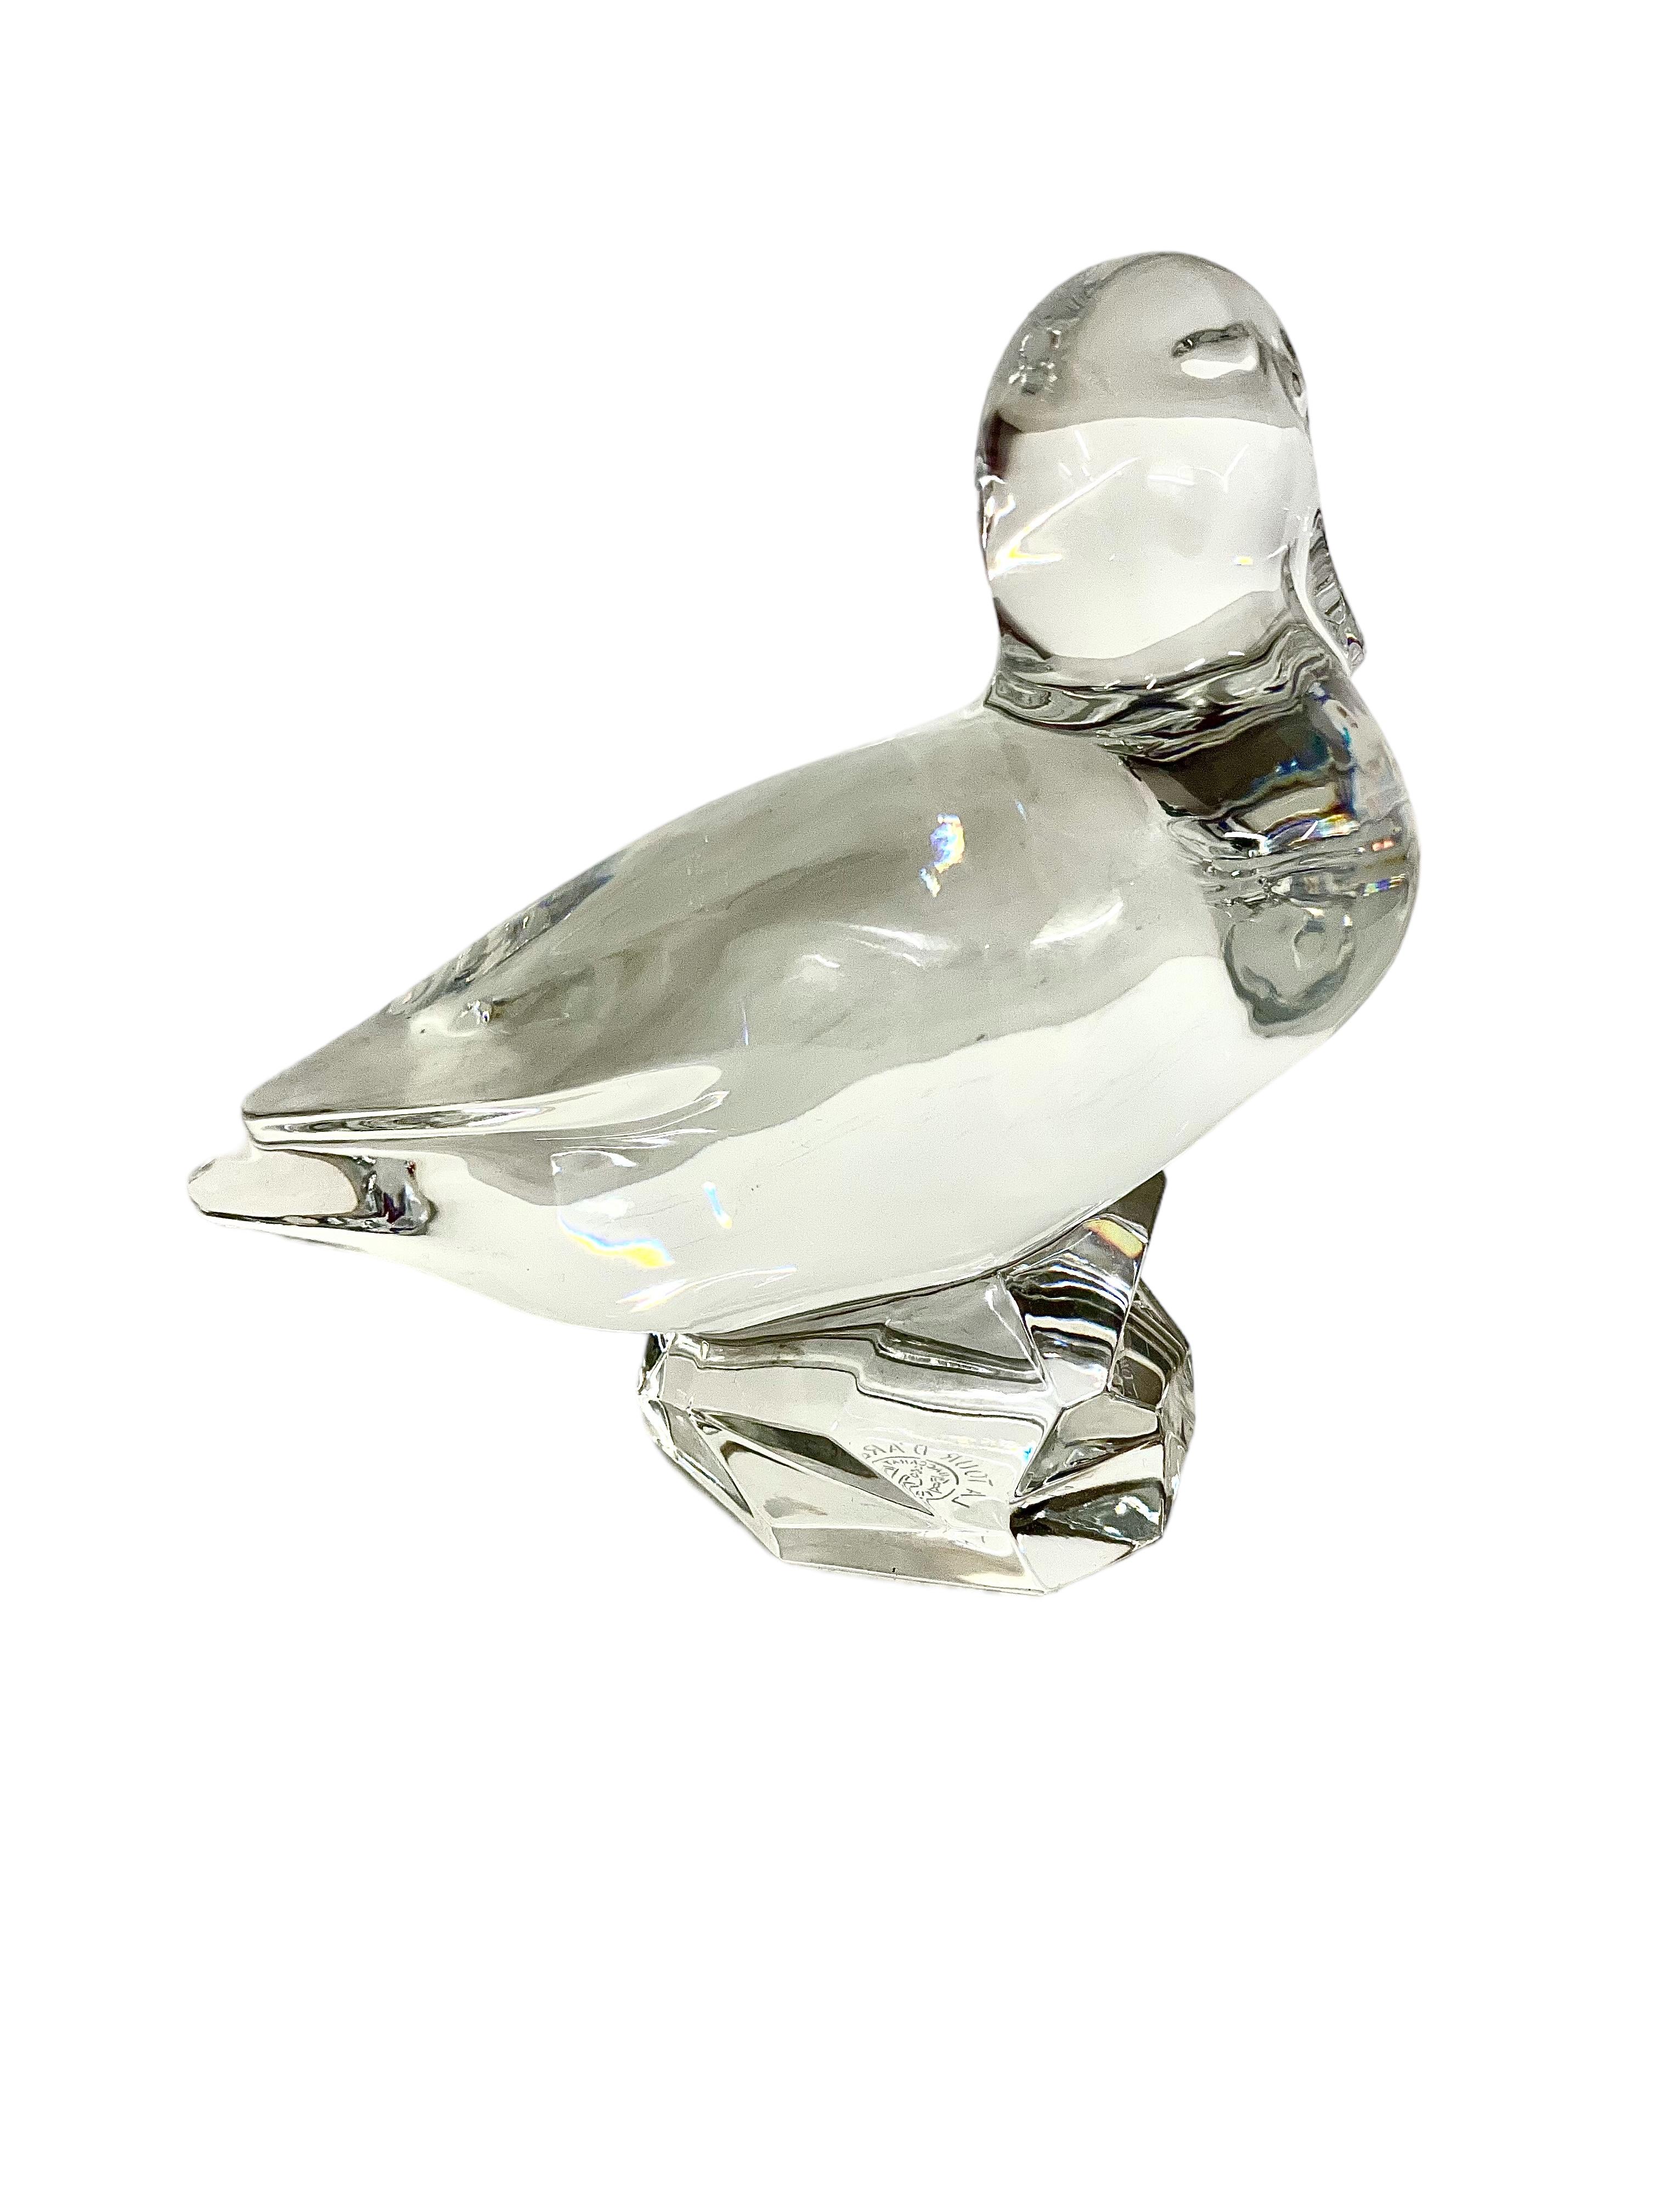 An exquisite duck figurine in sparkling Baccarat crystal, etched with their trademark seal on its base, along with 'La Tour d'Argent, Paris'. This model of duck was created exclusively for the historic restaurant of that name located on Quai de la